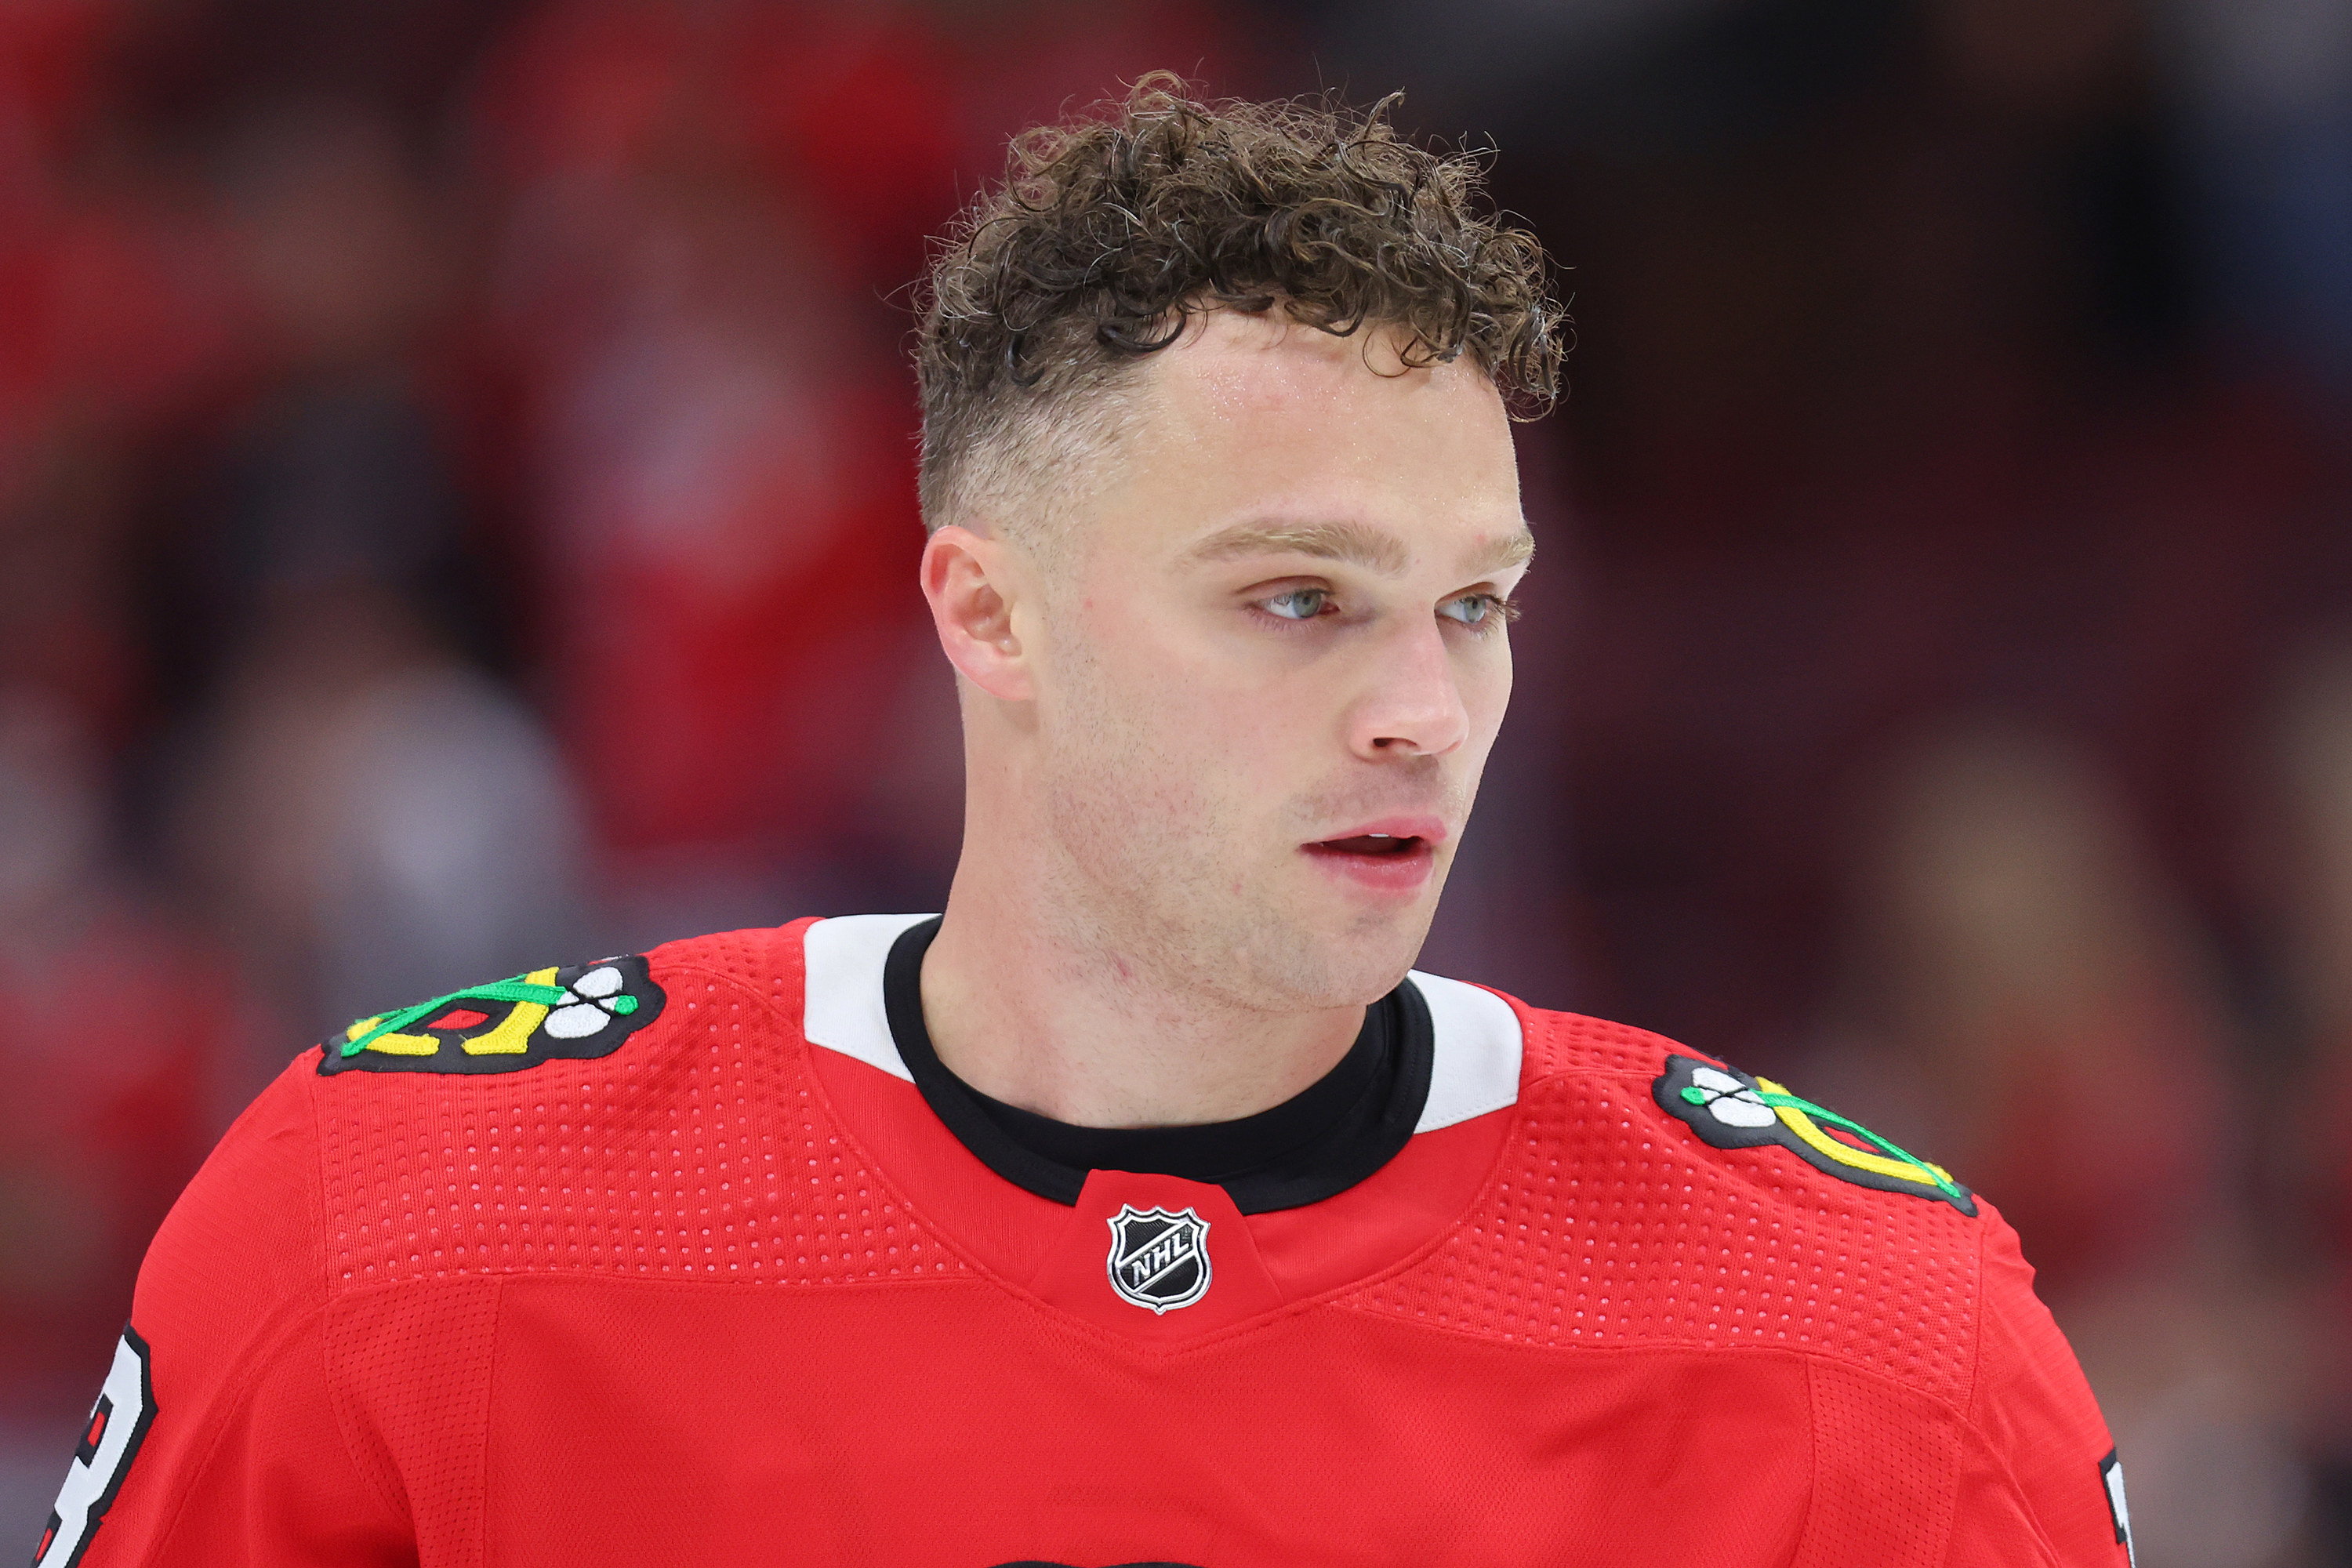 Max Domi #13 of the Chicago Blackhawks looks on prior to the game against the Detroit Red Wings at United Center